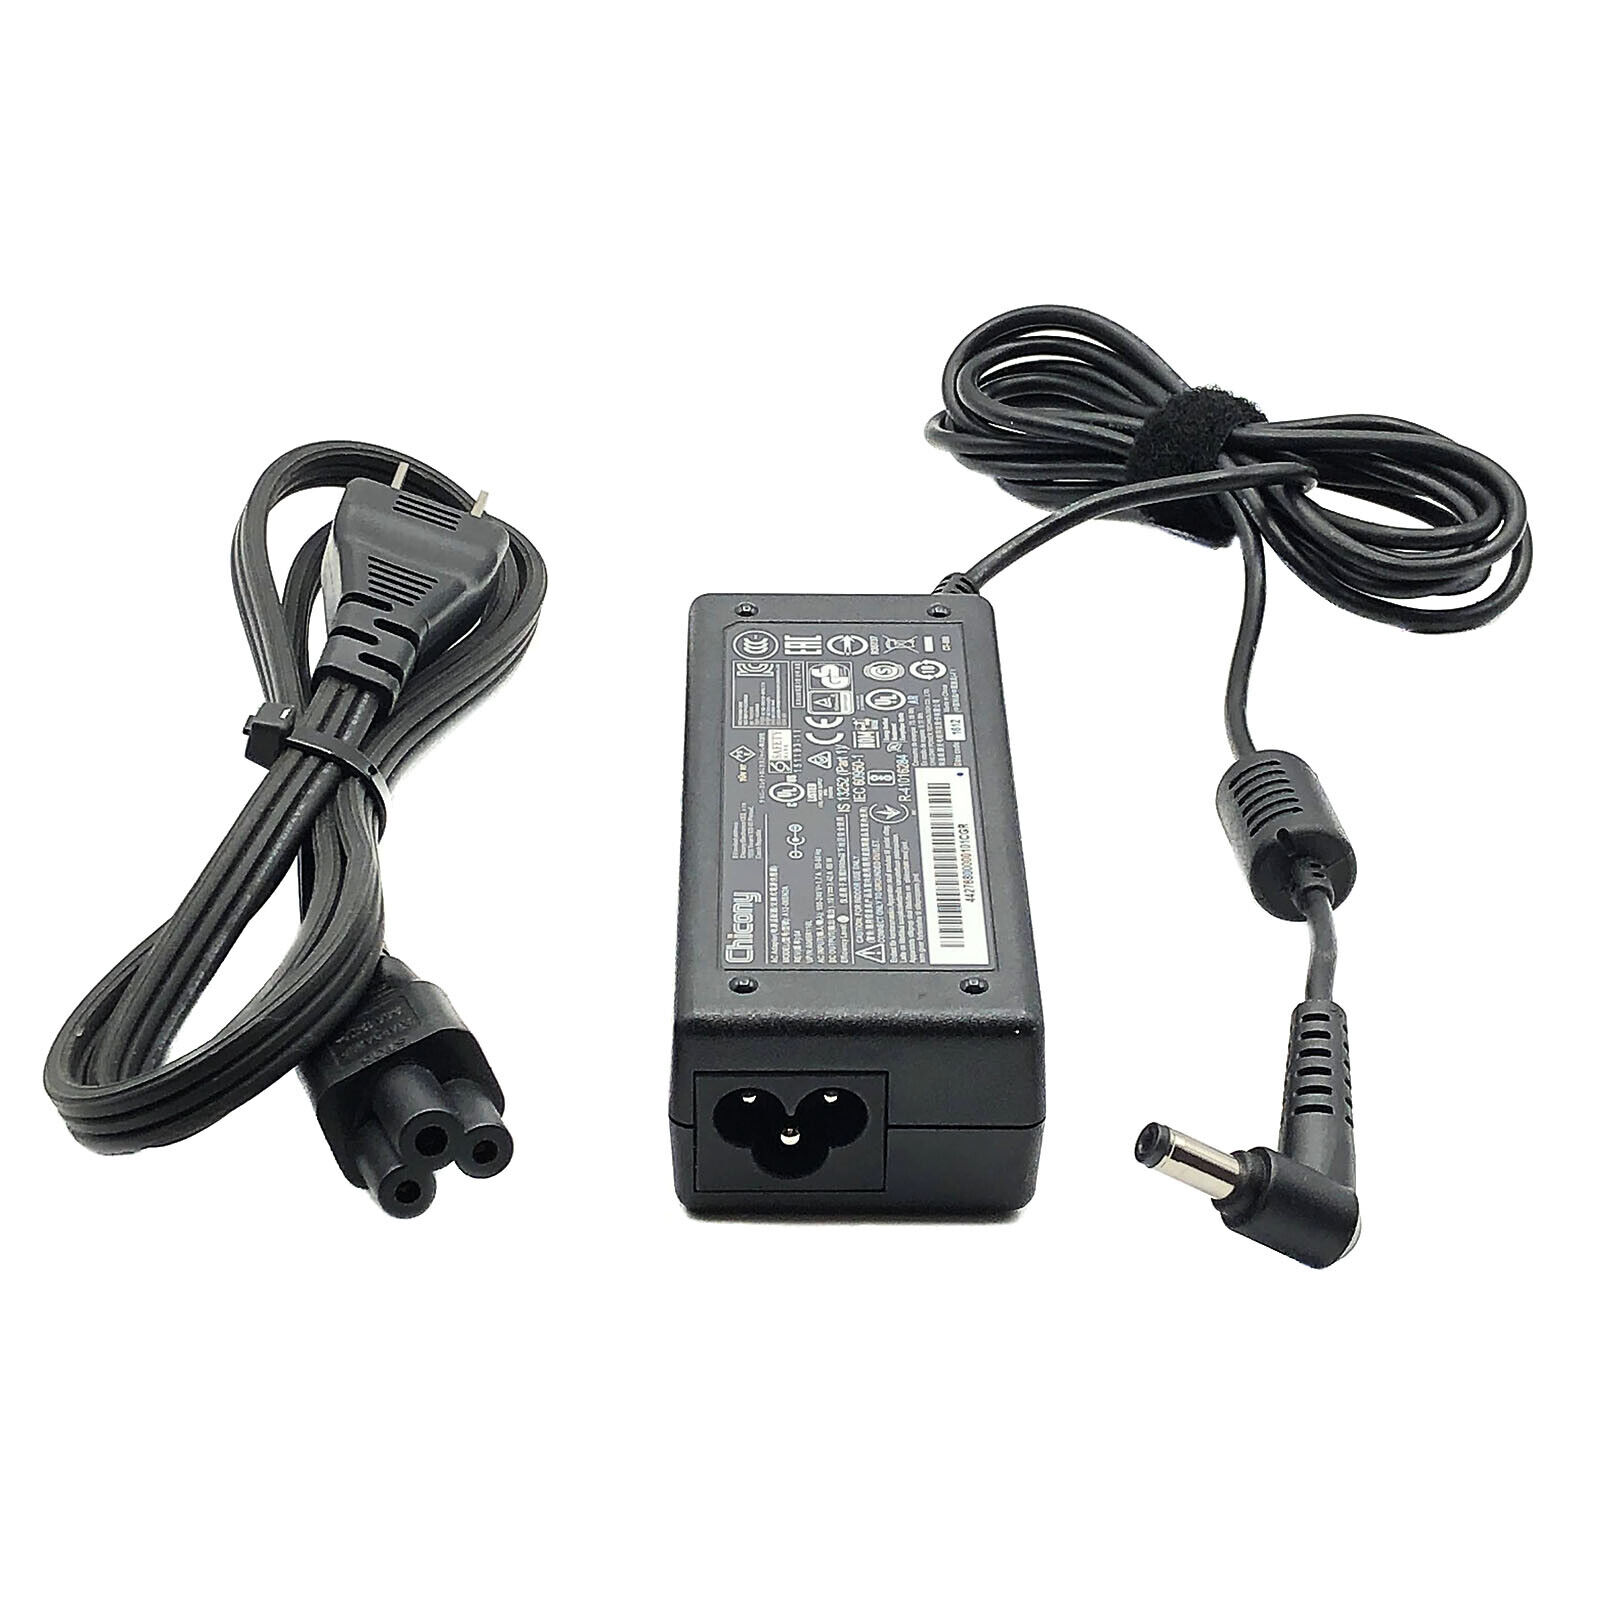 *Brand NEW*Genuine Chicony 19V 3.42A 65W AC Adapter A12-065N2A for MSI VR321 VR330 VR340 Power Supp